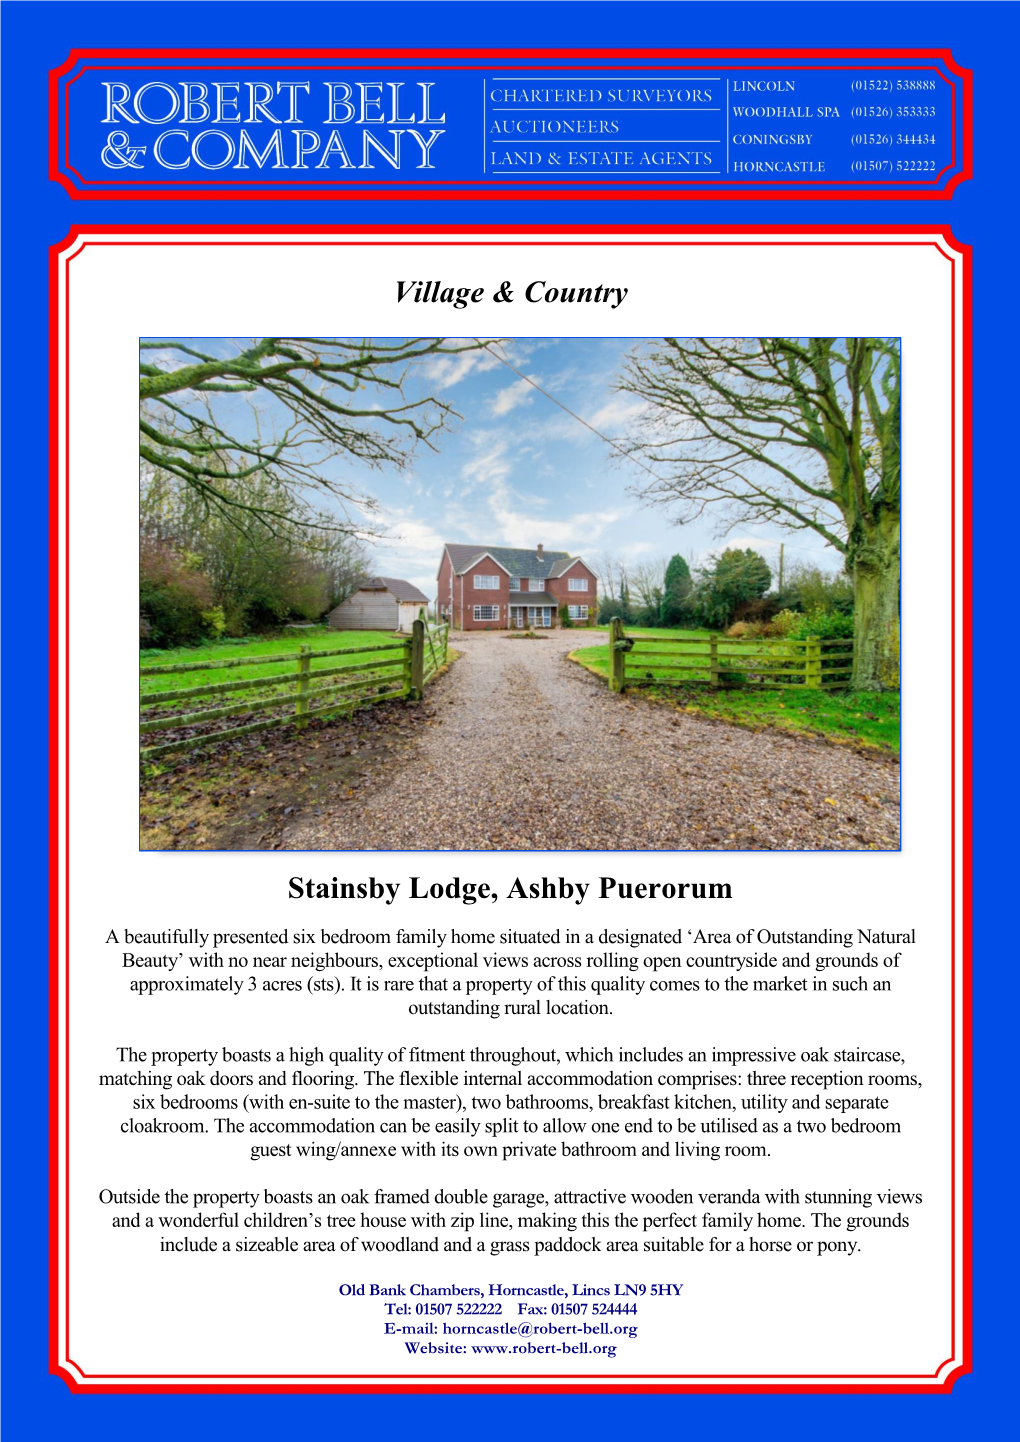 Village & Country Stainsby Lodge, Ashby Puerorum